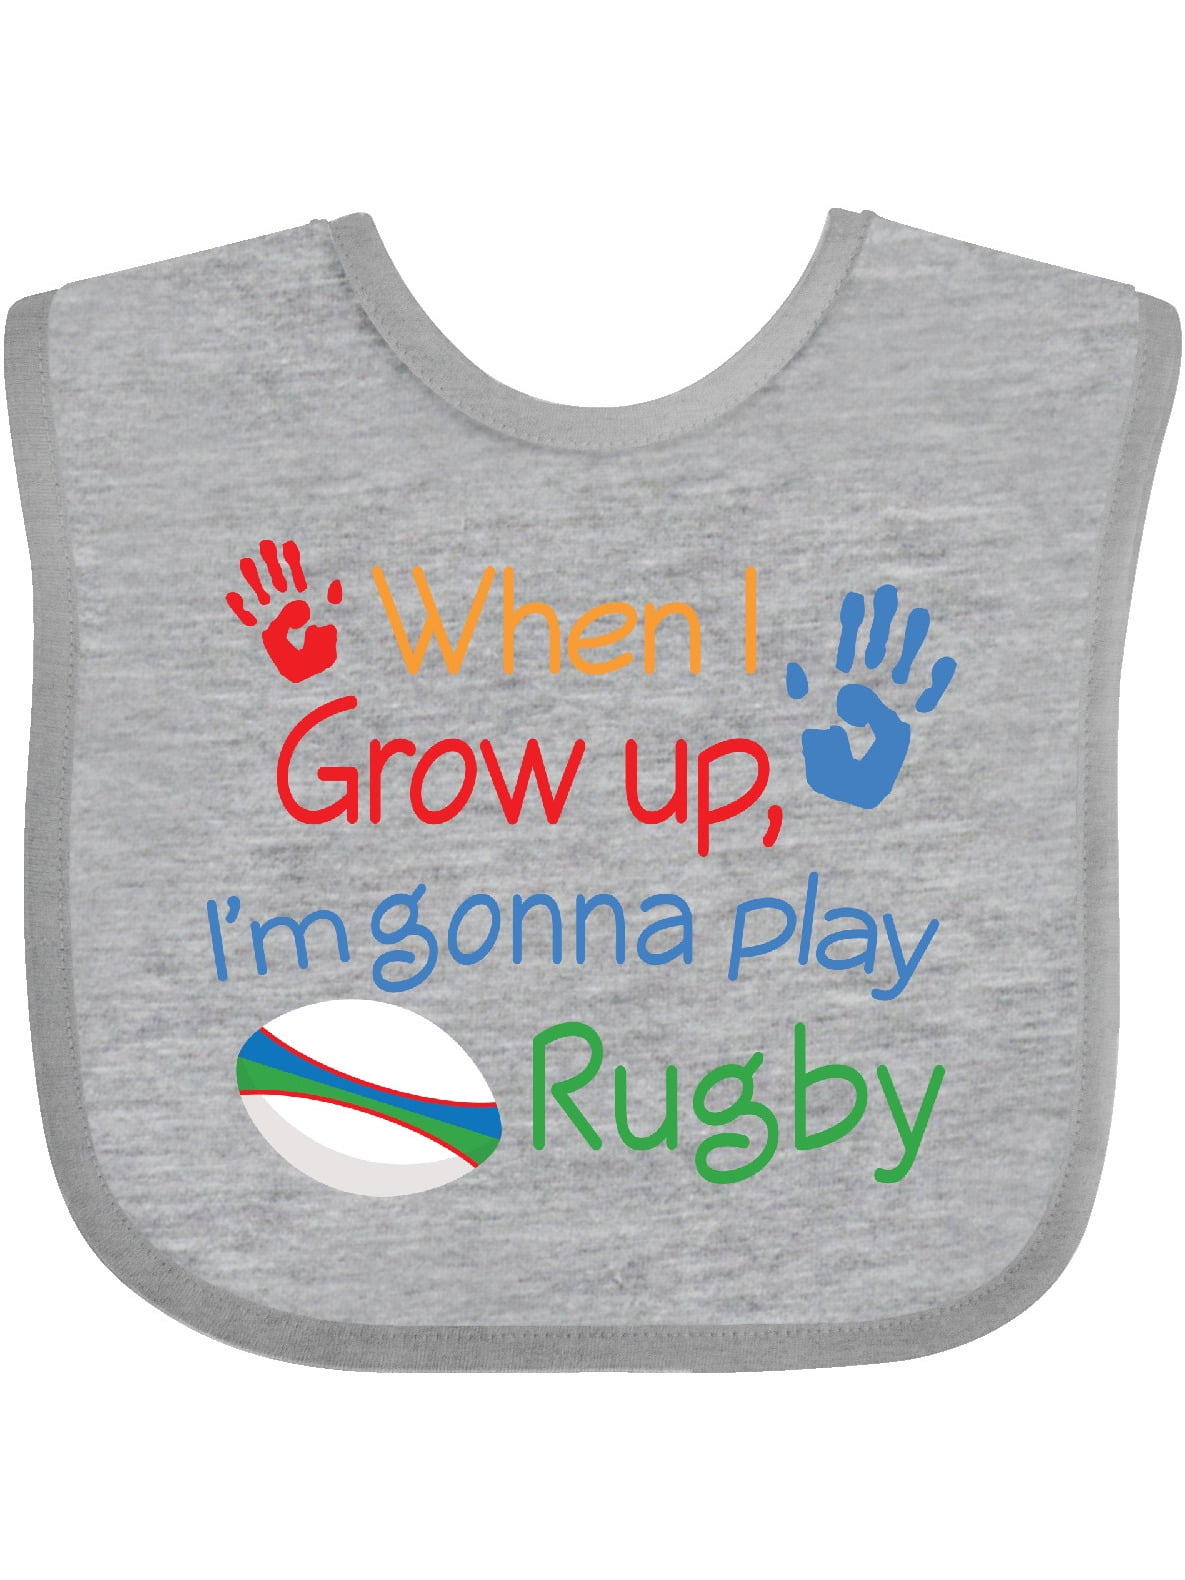 RUGBY PLAYER PERSONALISED BABY BIB ANY NAME/EDGE COLOUR NEW BABY GIFT/PRESENT 